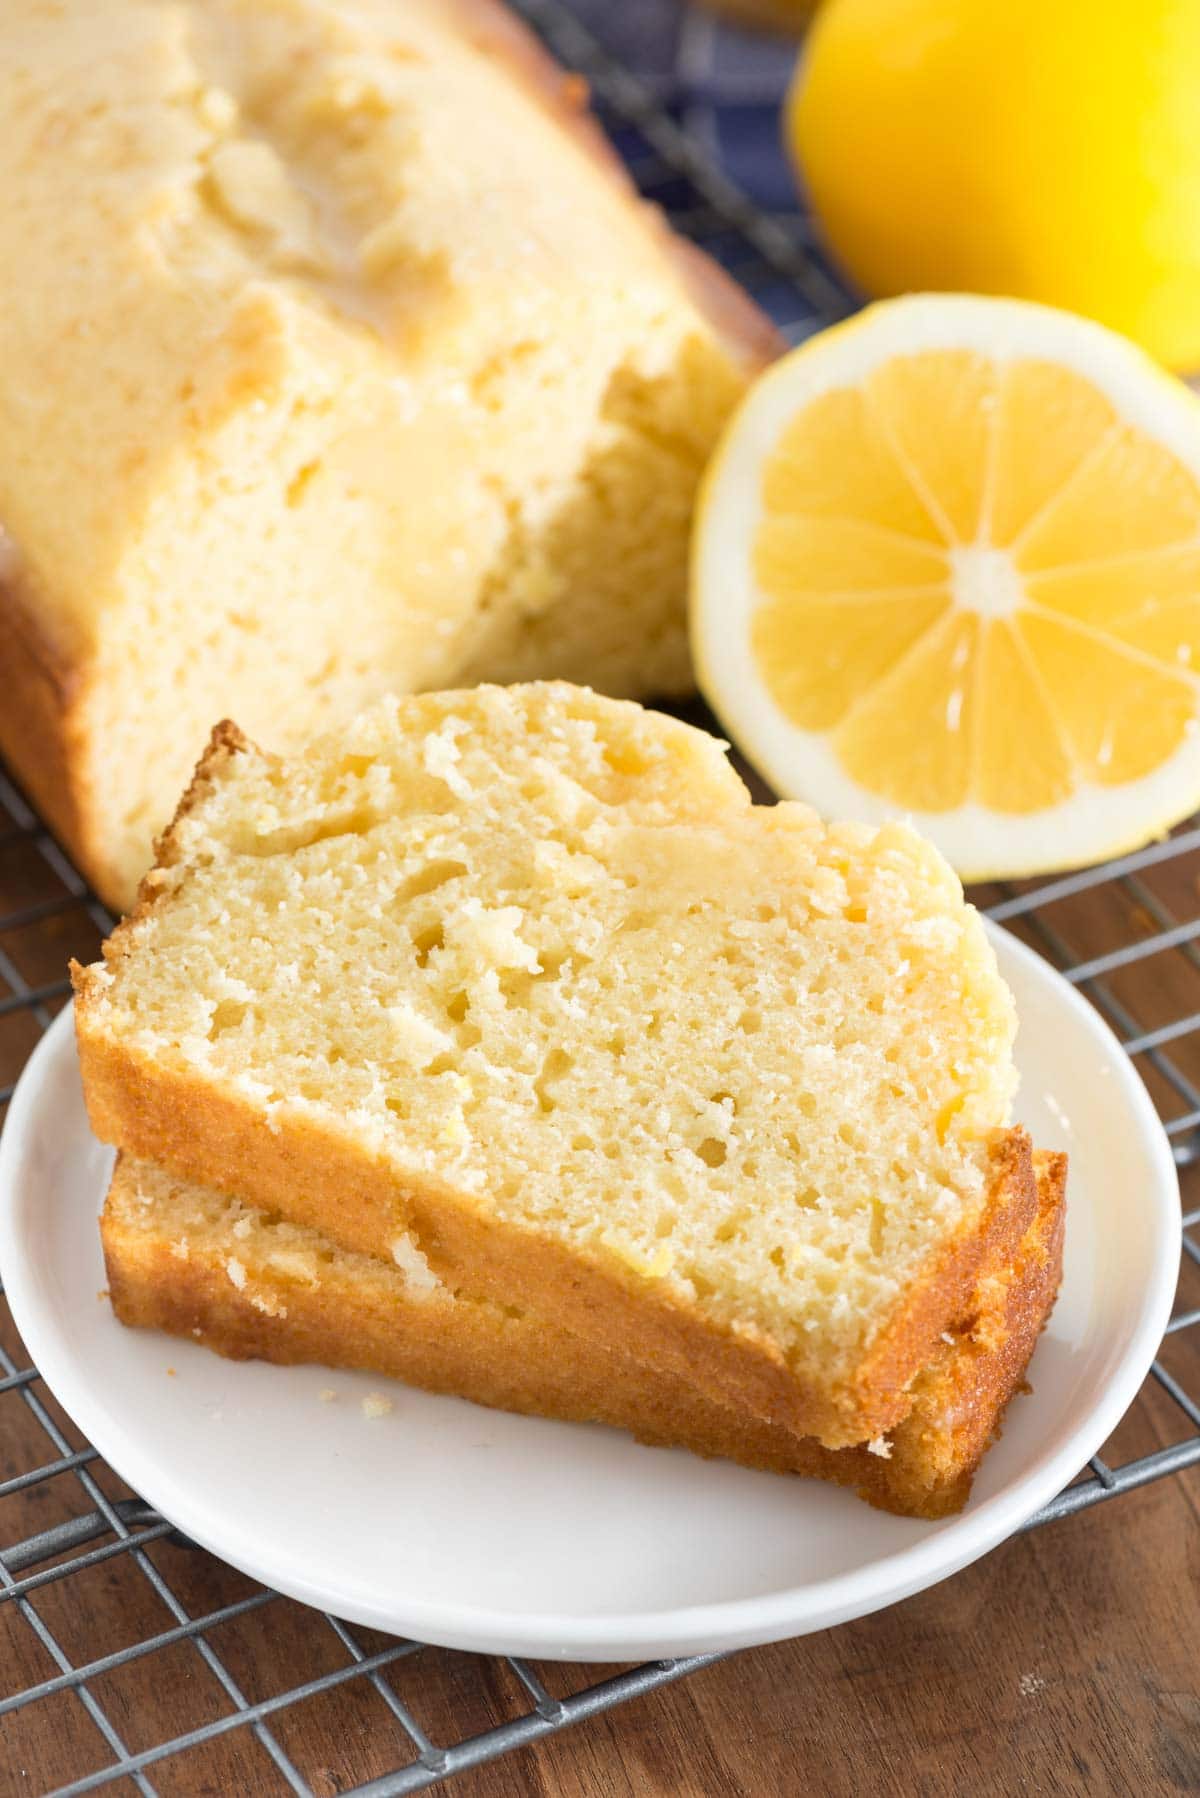 Lemon Quick Bread - this easy quick bread recipe is bursting with lemon flavor. It's great for dessert or breakfast - with or without a lemon glaze!